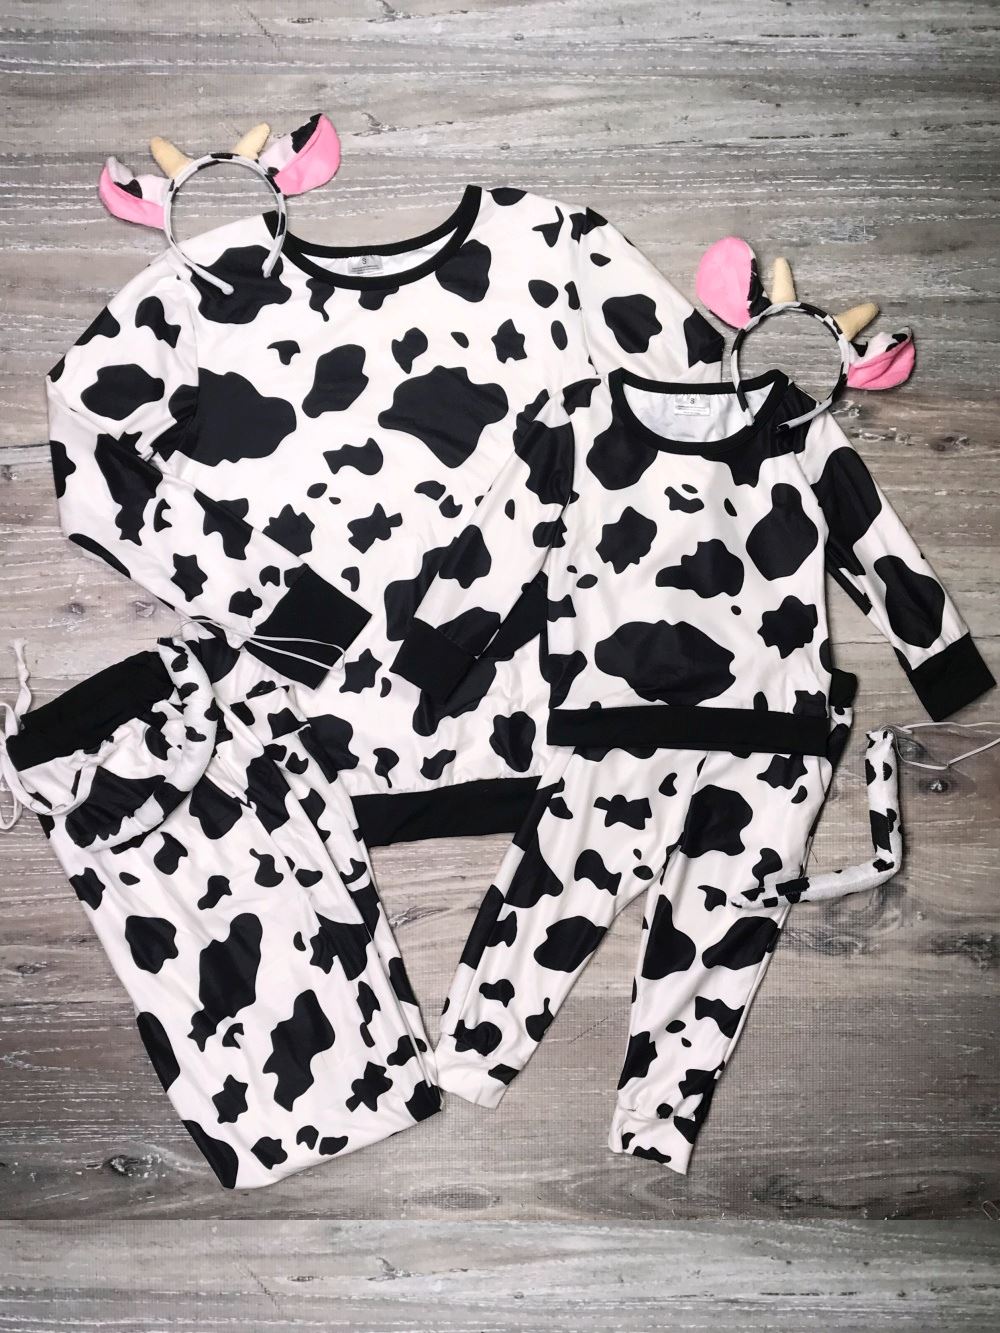 Mommy and Me Matching Costumes - Cow Costume Set - Sydney So Sweet